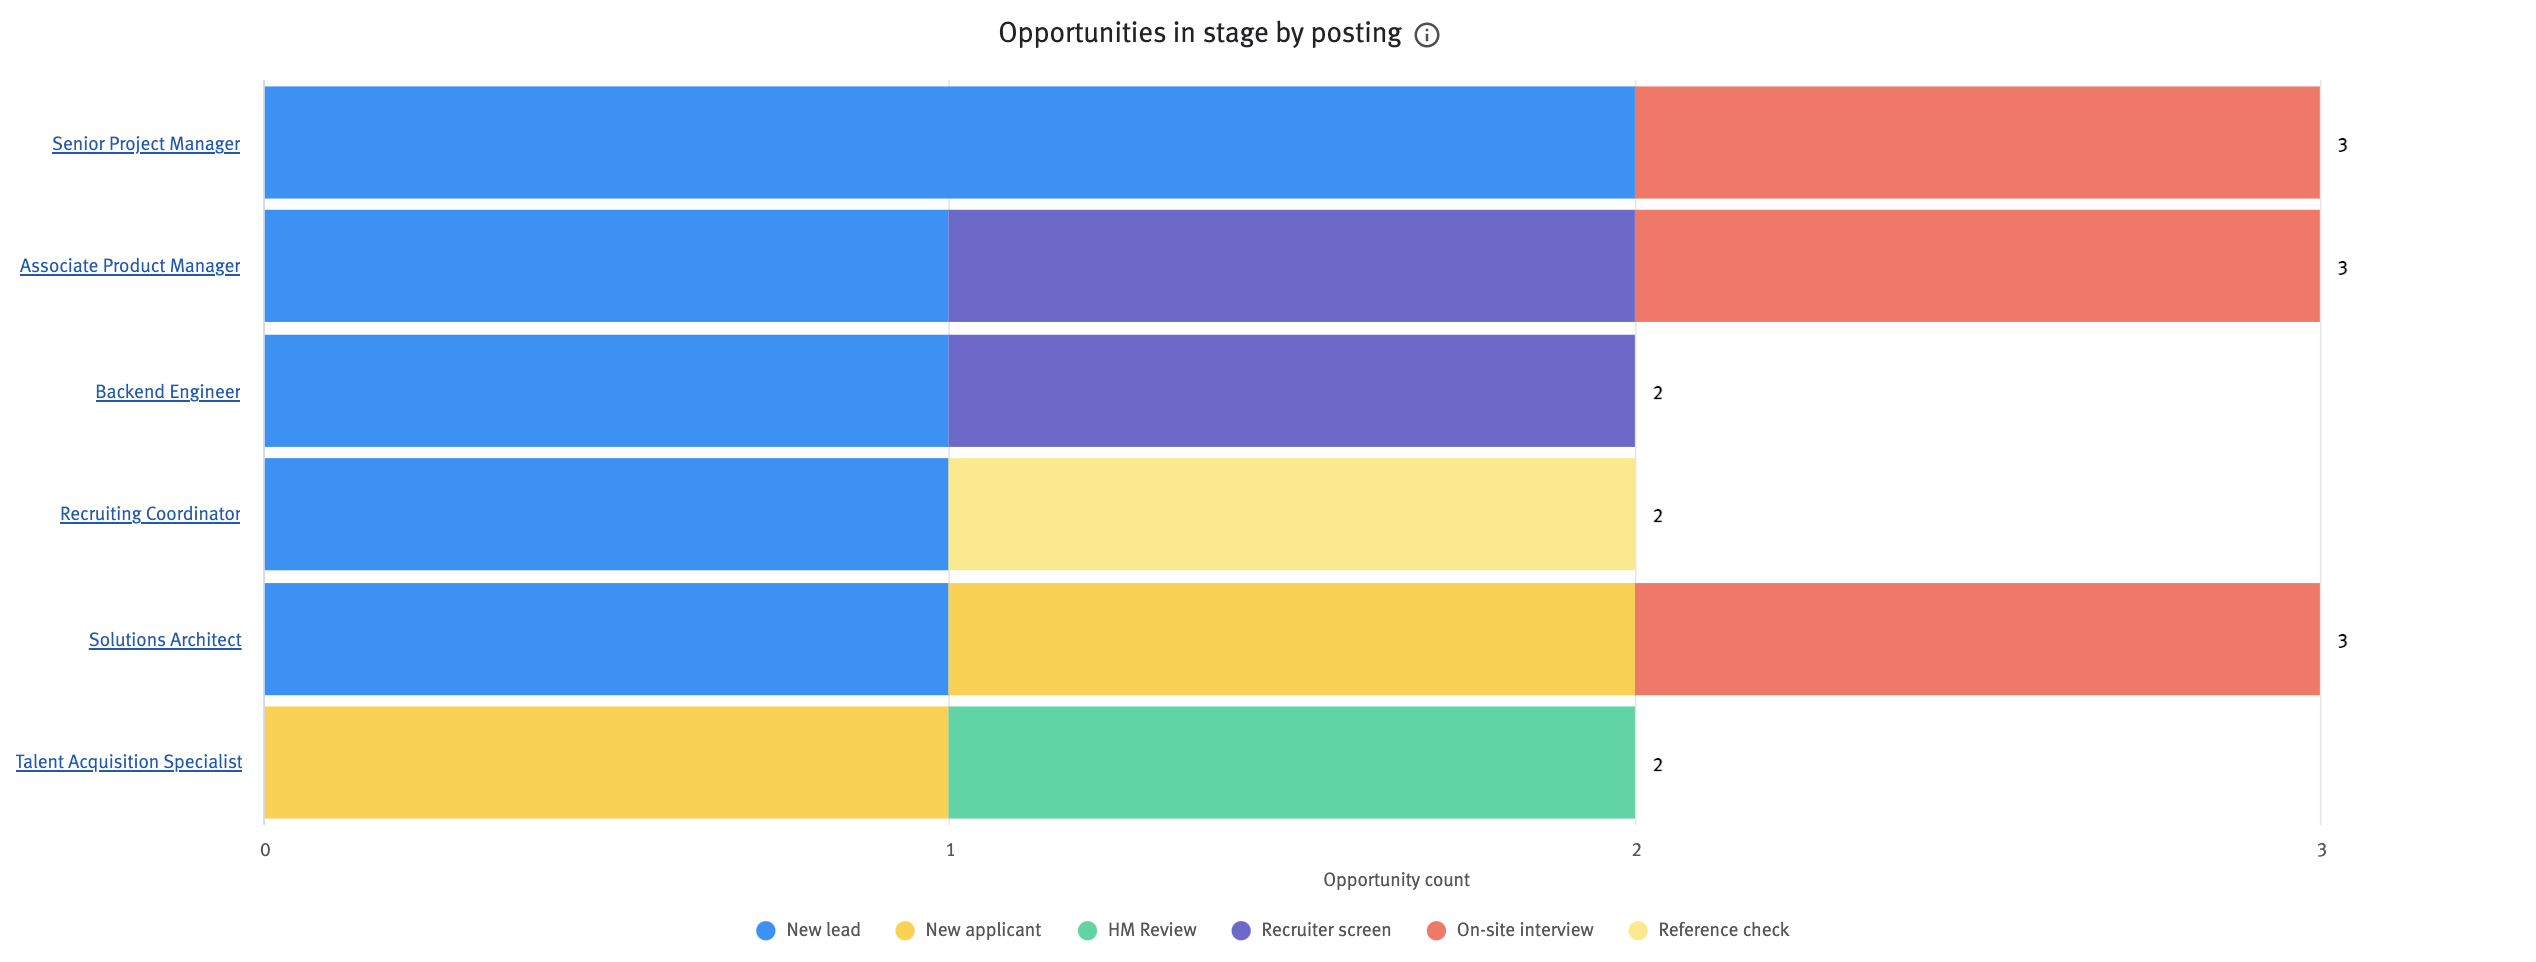 Opportunities in stage by posting chart